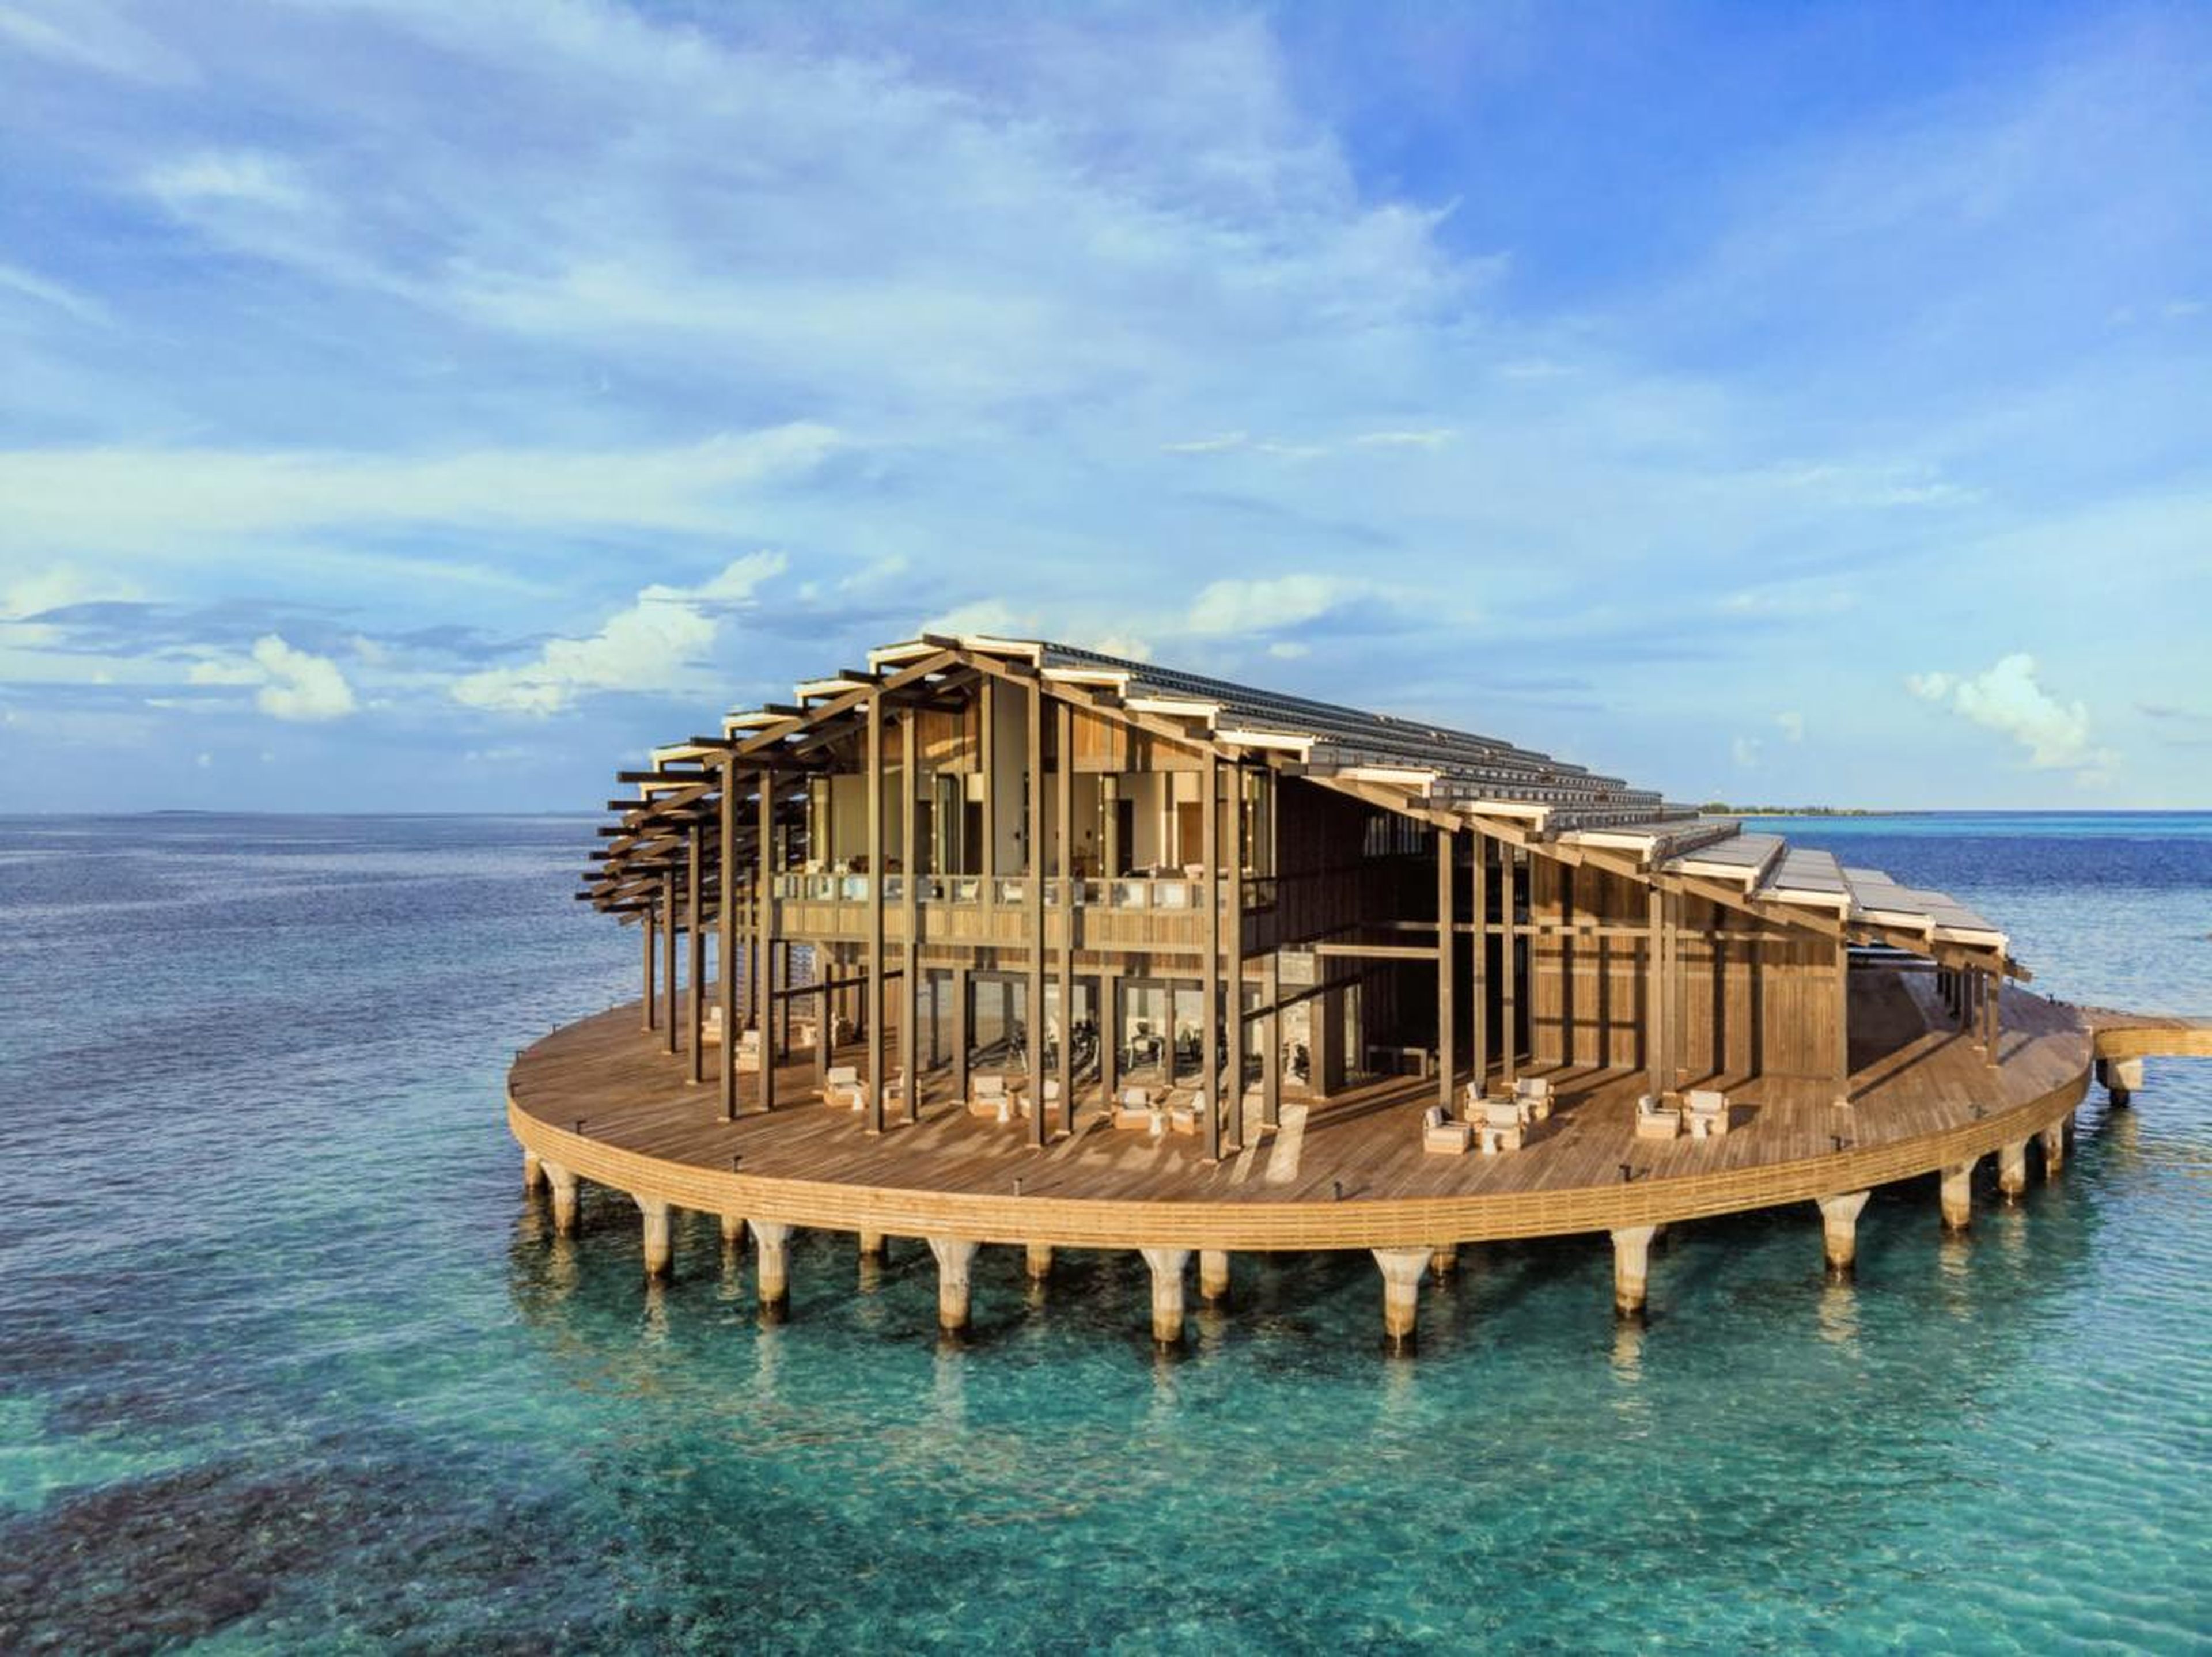 The resort consists of 15 bungalows that arch out over the water in a circular shape.